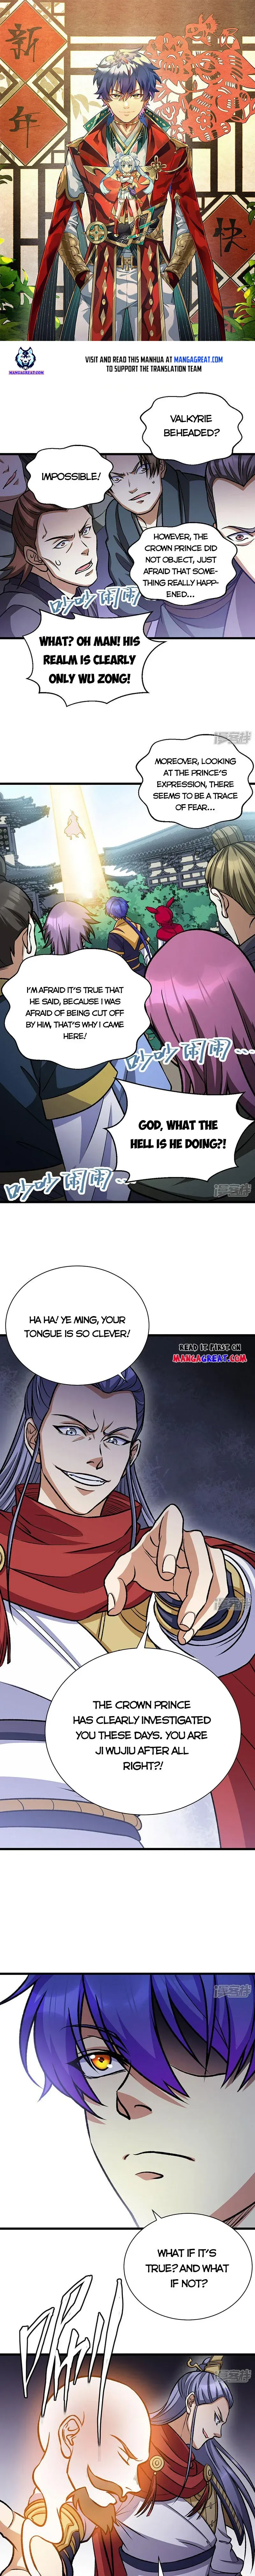 Martial Arts Reigns Chapter 574 page 1